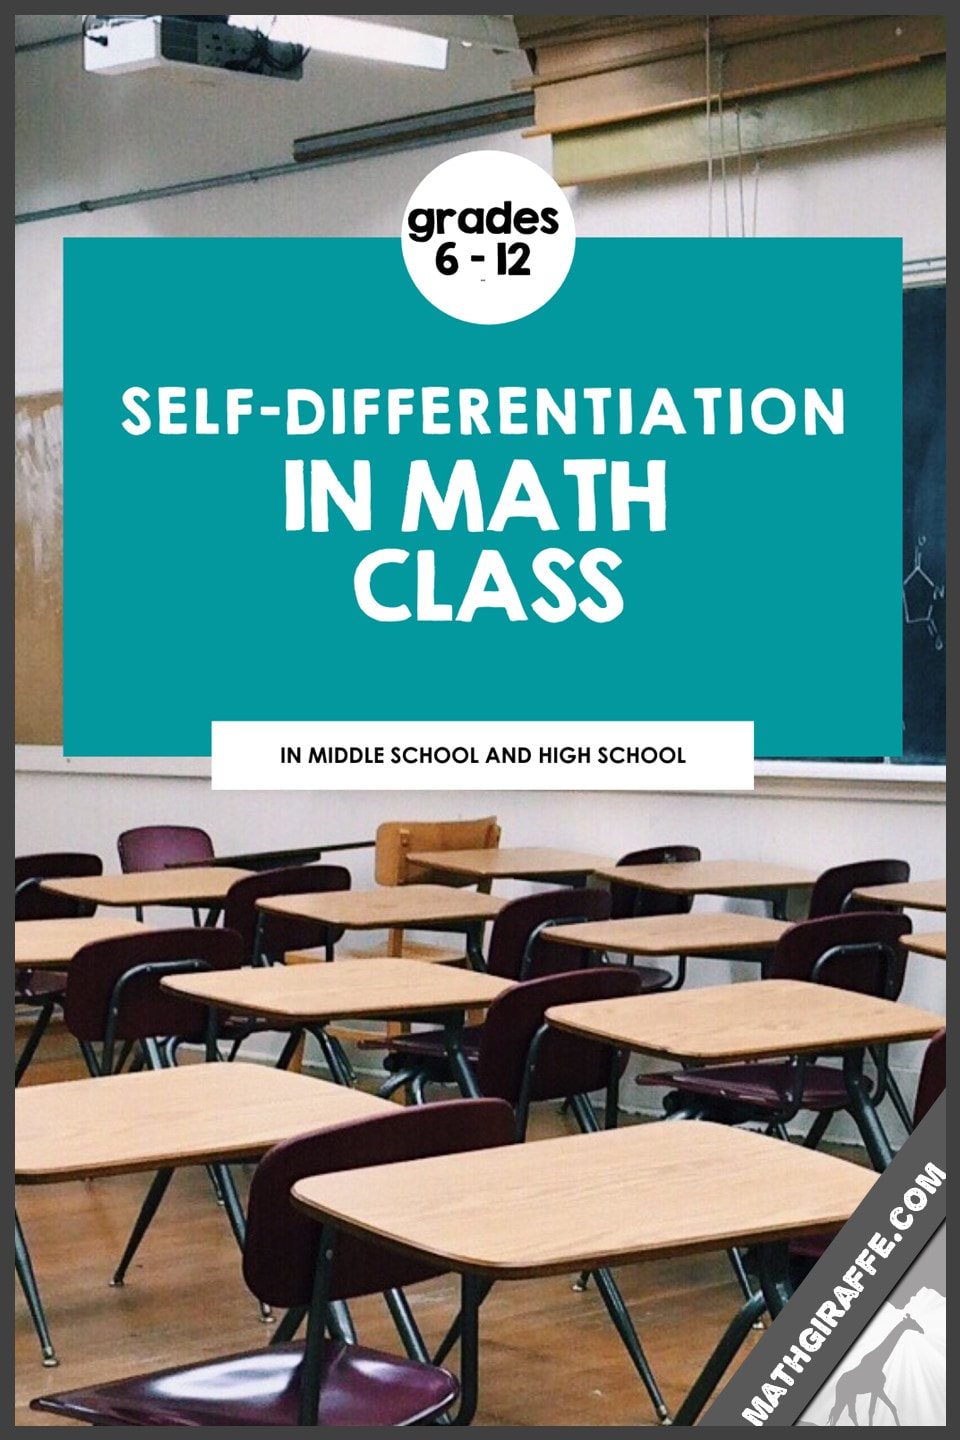 Differentiation in Math Class, Simplified: How to Have Students Self-Differentiate